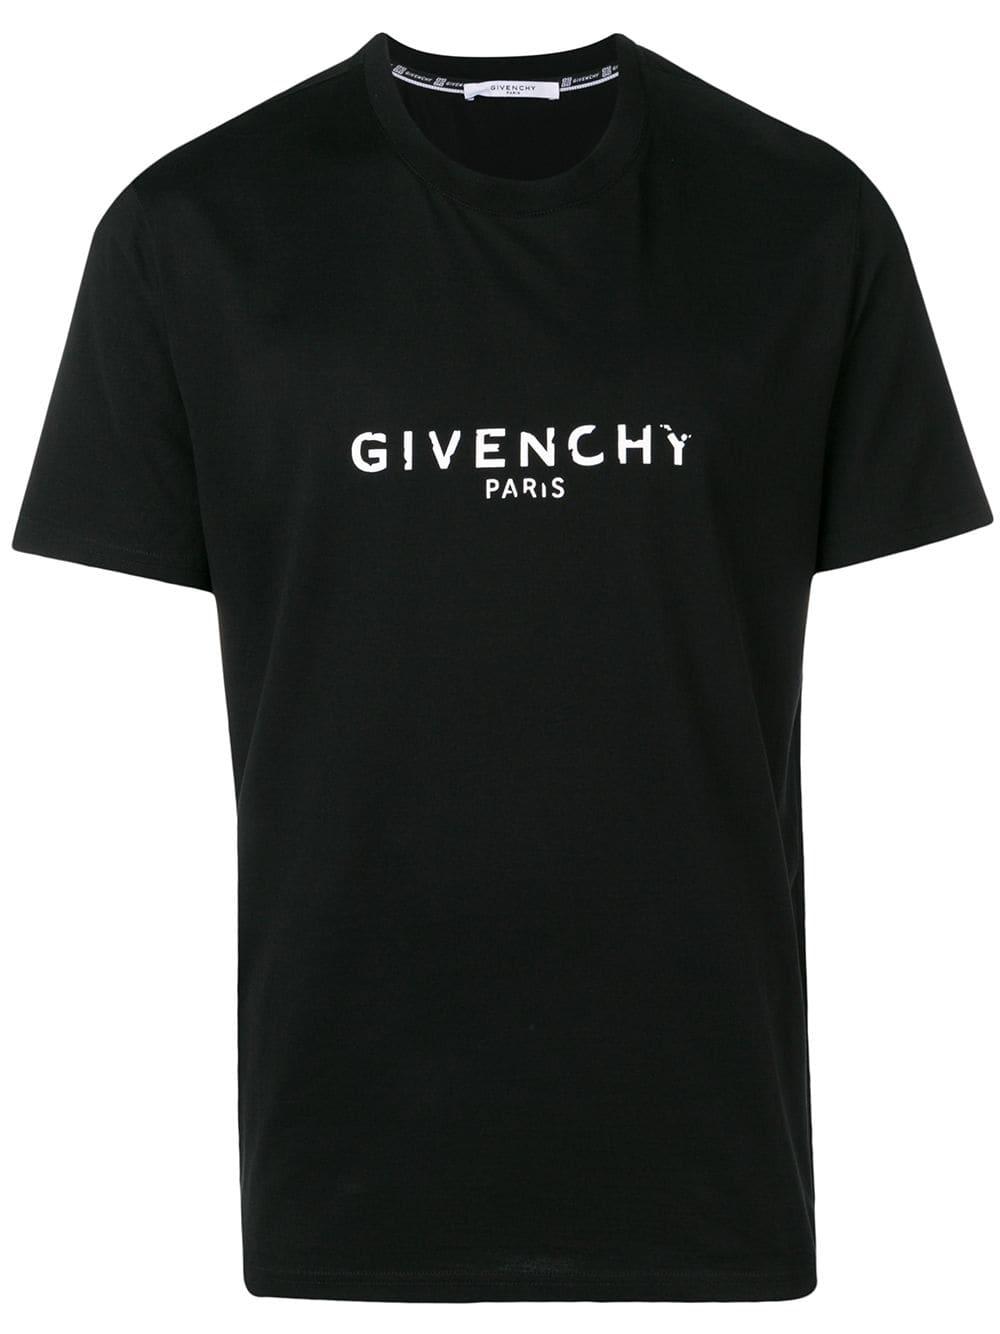 Givenchy Logo Print T-shirt in Black for Men - Save 23% - Lyst